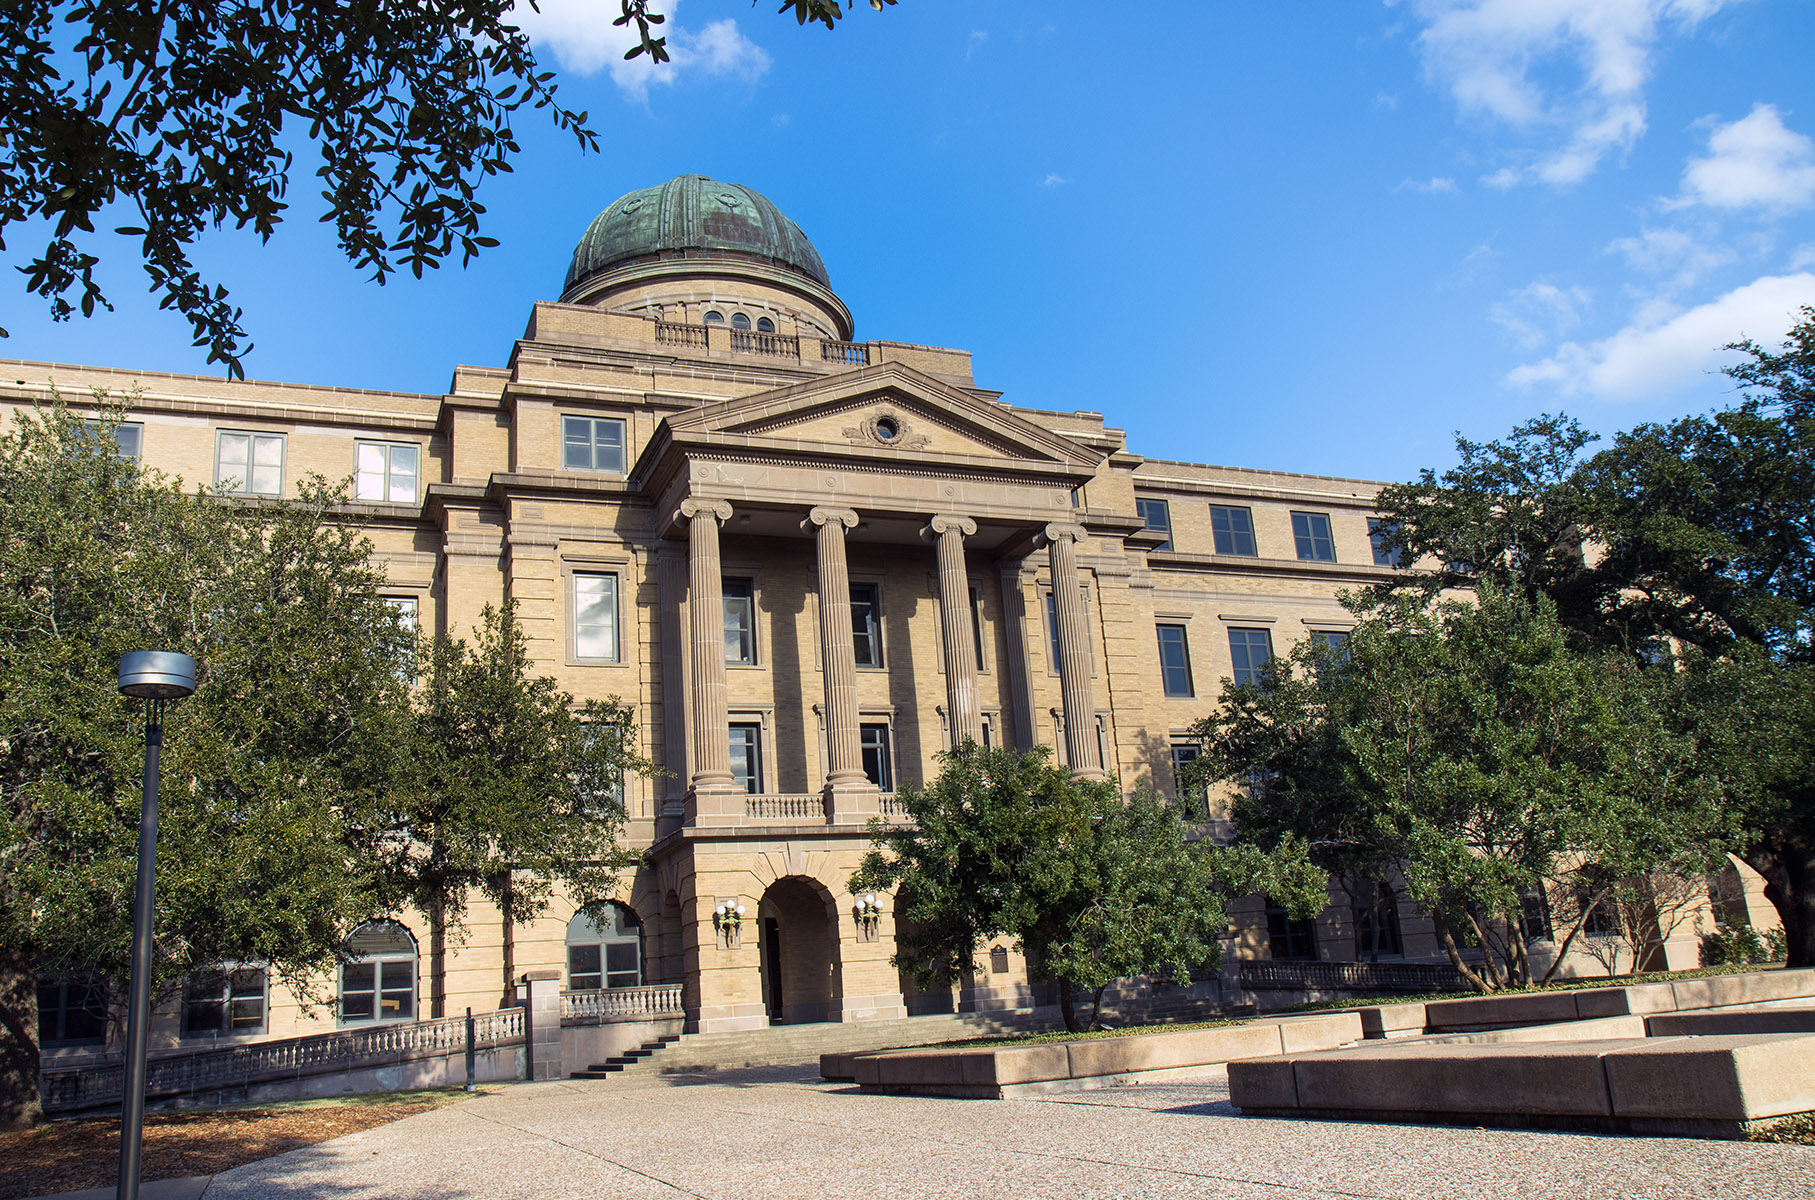 The Academic Building on the Texas A&M University campus